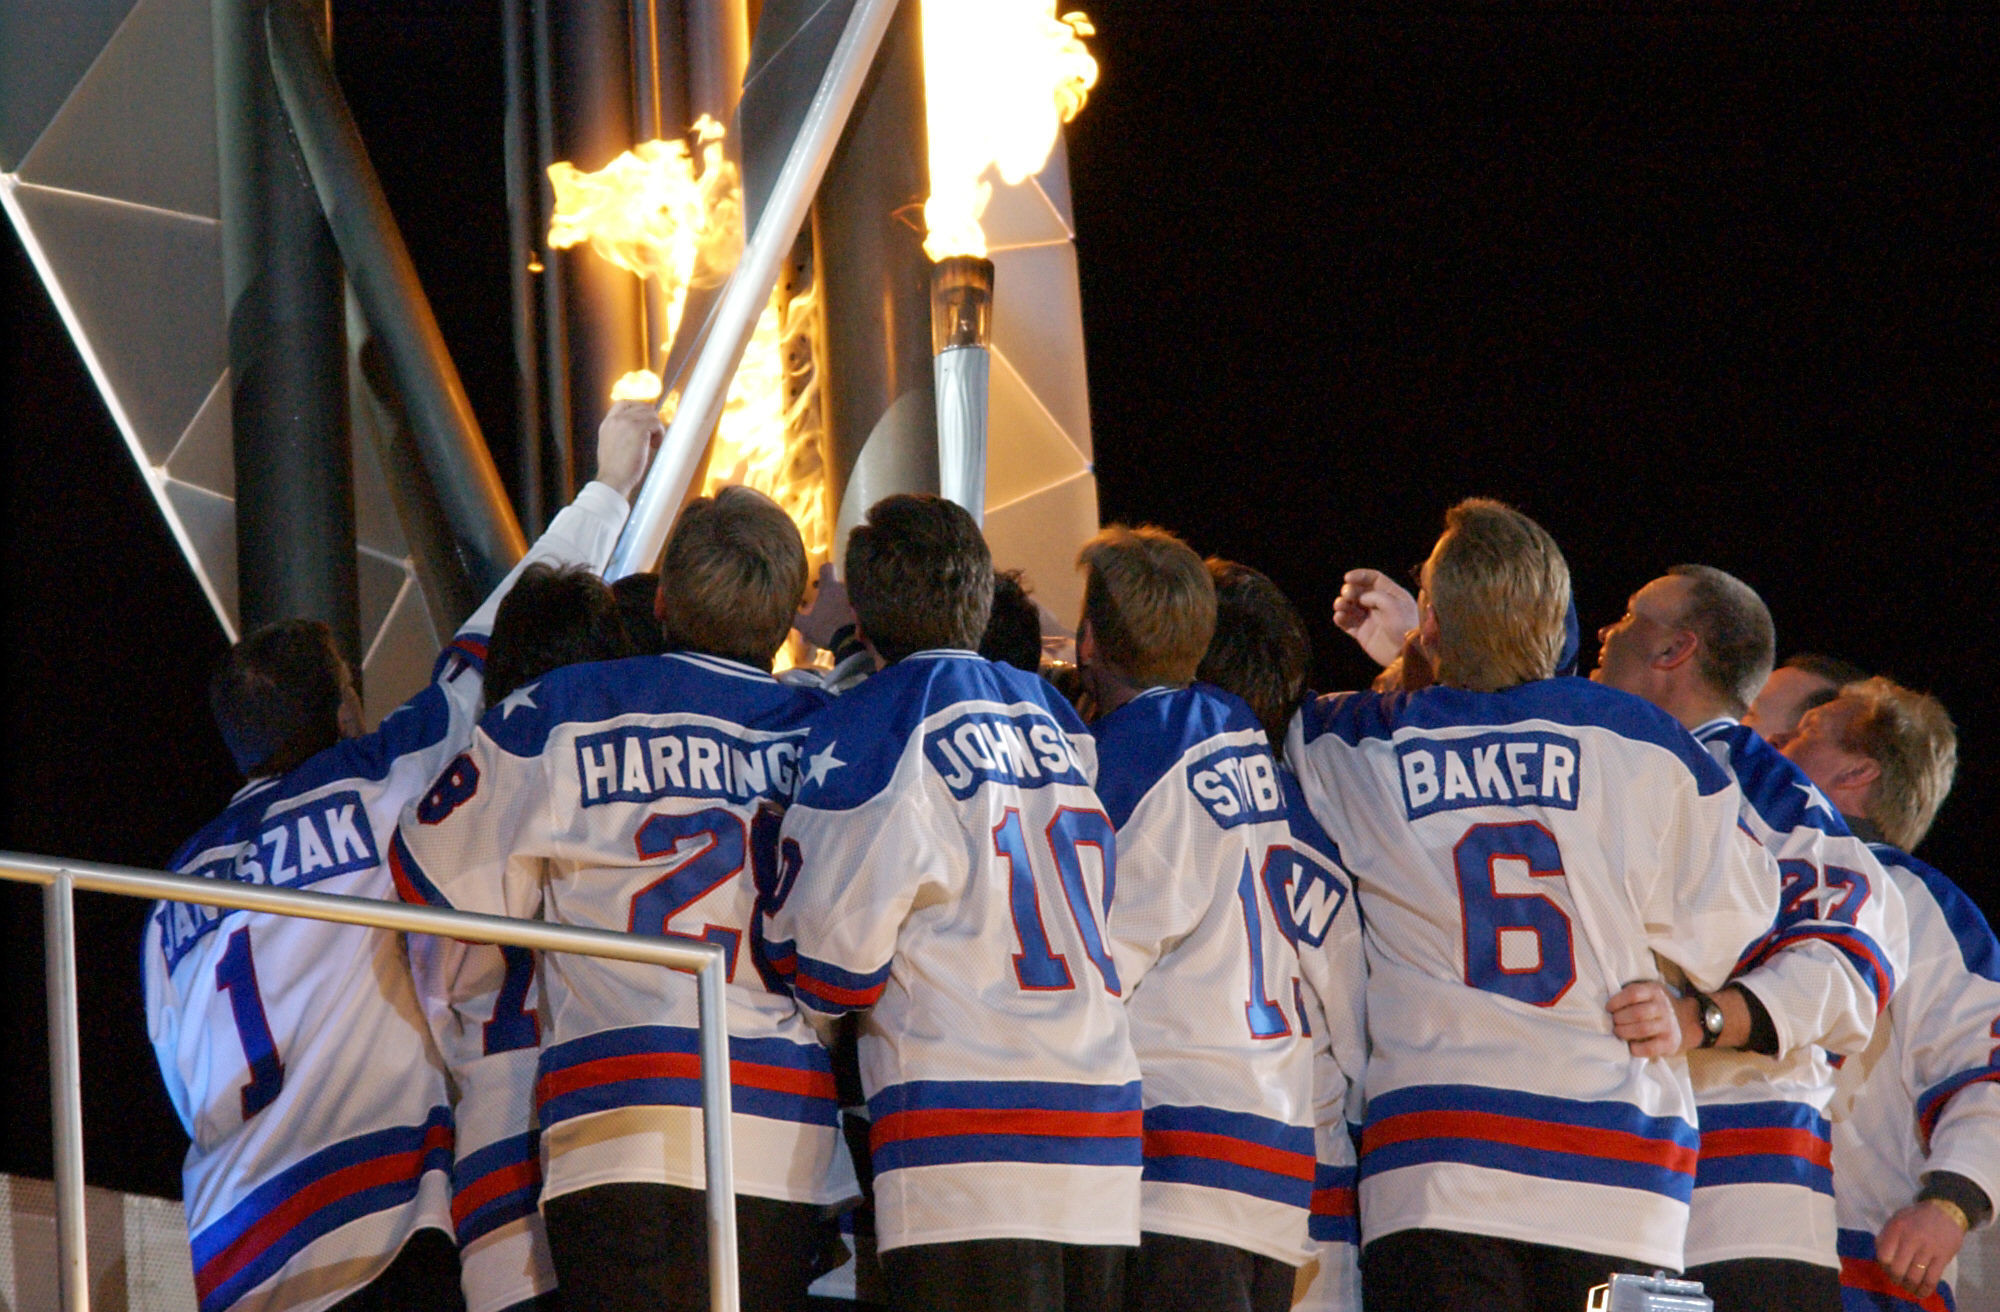 The 1980 US hockey team hold the Olympic Torch during the Opening Ceremony of the 2002 Winter Olympics in Salt Lake City ©John MacDougall/AFP via Getty Images